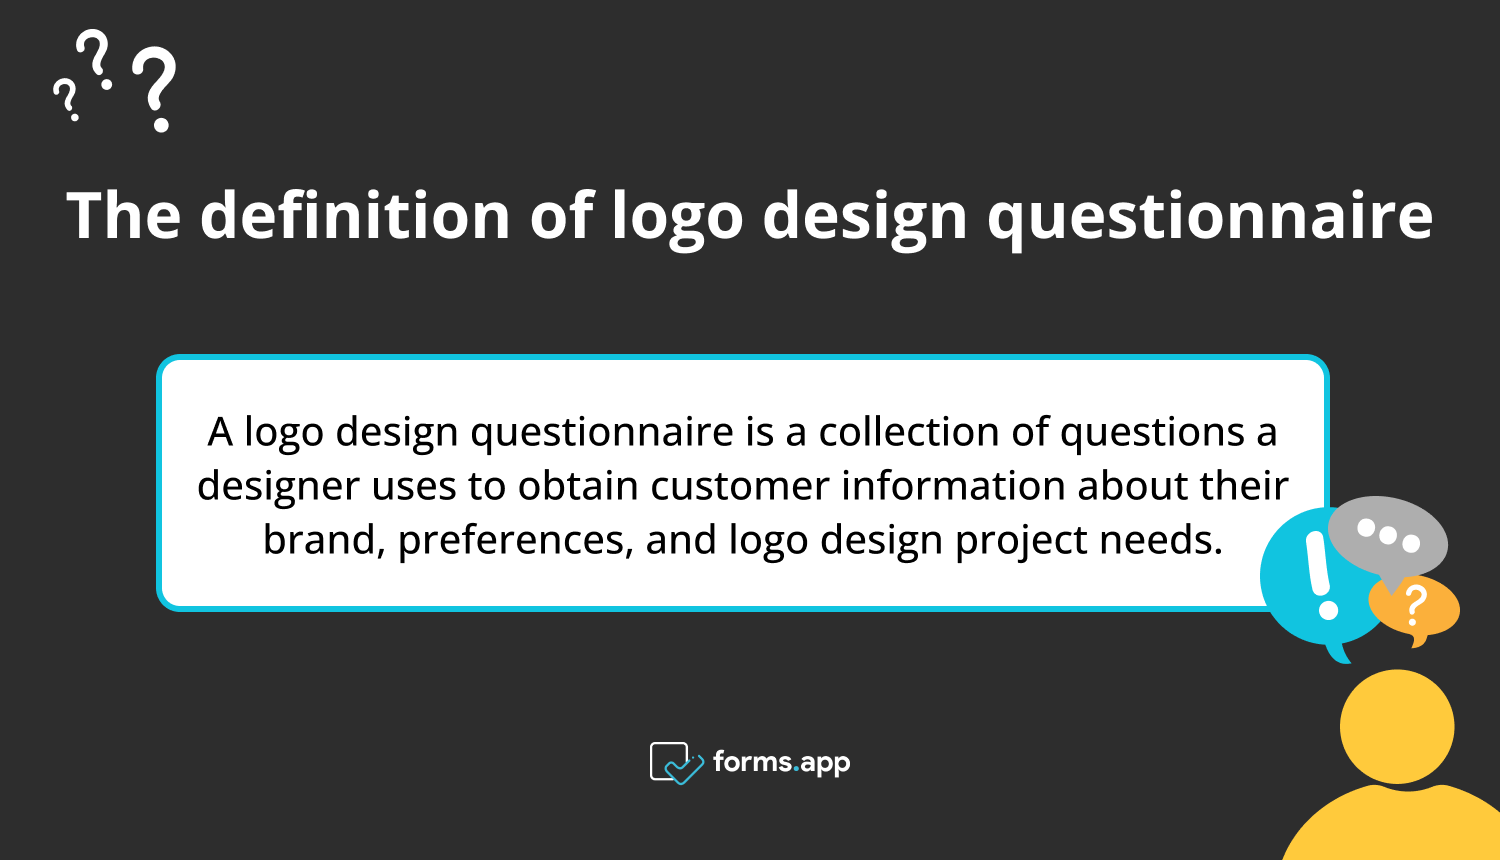 How to Design a Logo: A Complete Guide